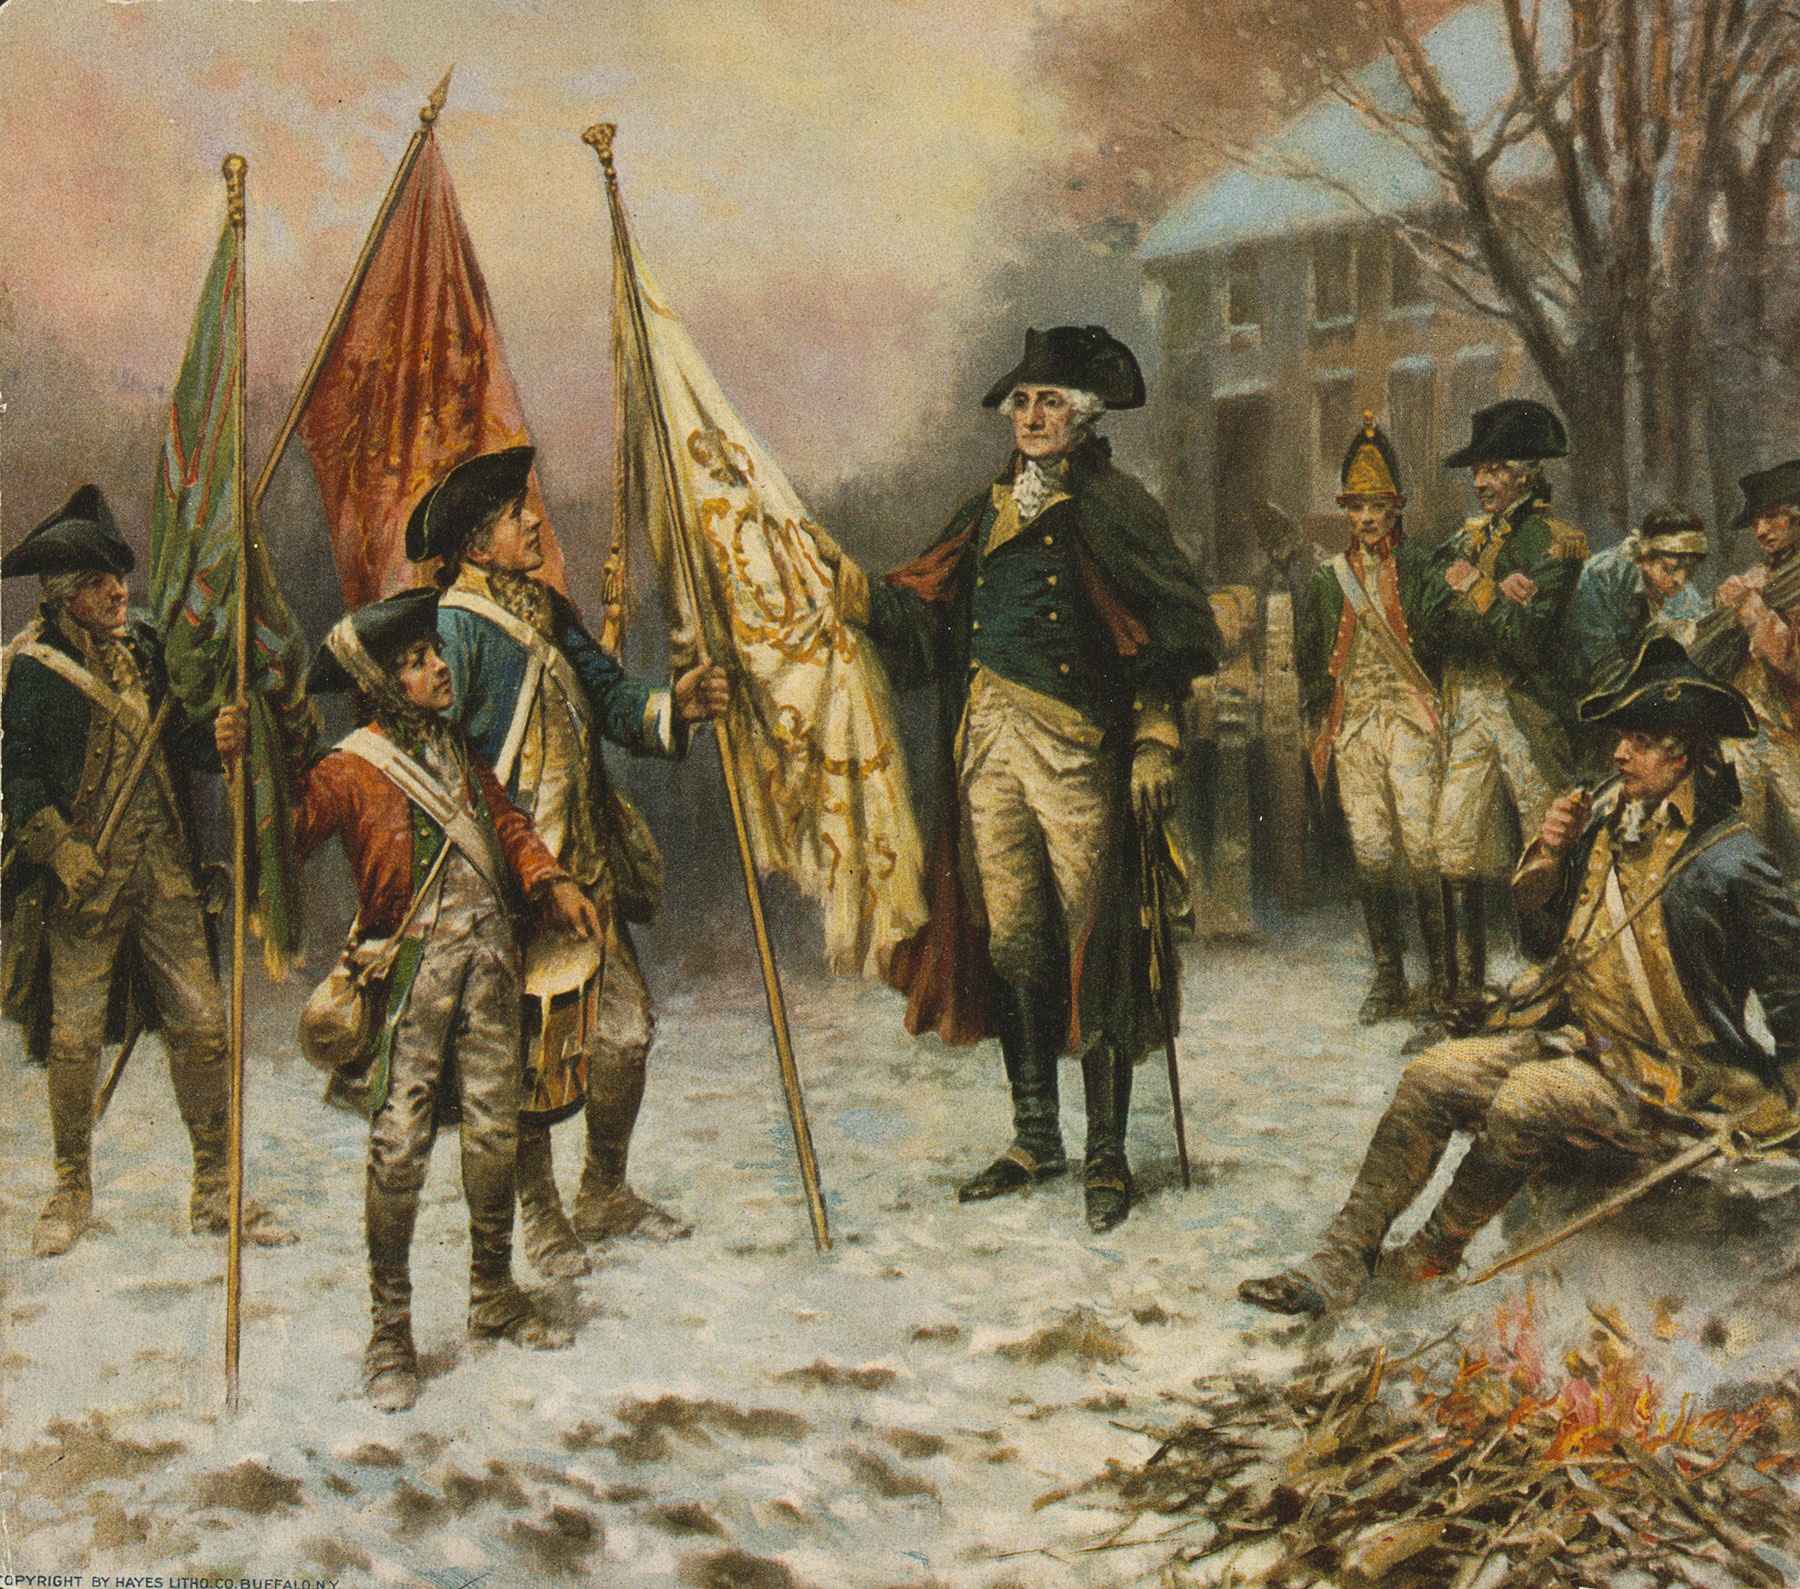 Tackle Today: What the military taught me about investing. (Title: Washington inspecting the captured colors after the battle of Trenton / Contributor Names: Moran, Percy, 1862-1935, artist / Created-Published c1914 Aug. 10. / Source: https://www.loc.gov/item/2003668277/)